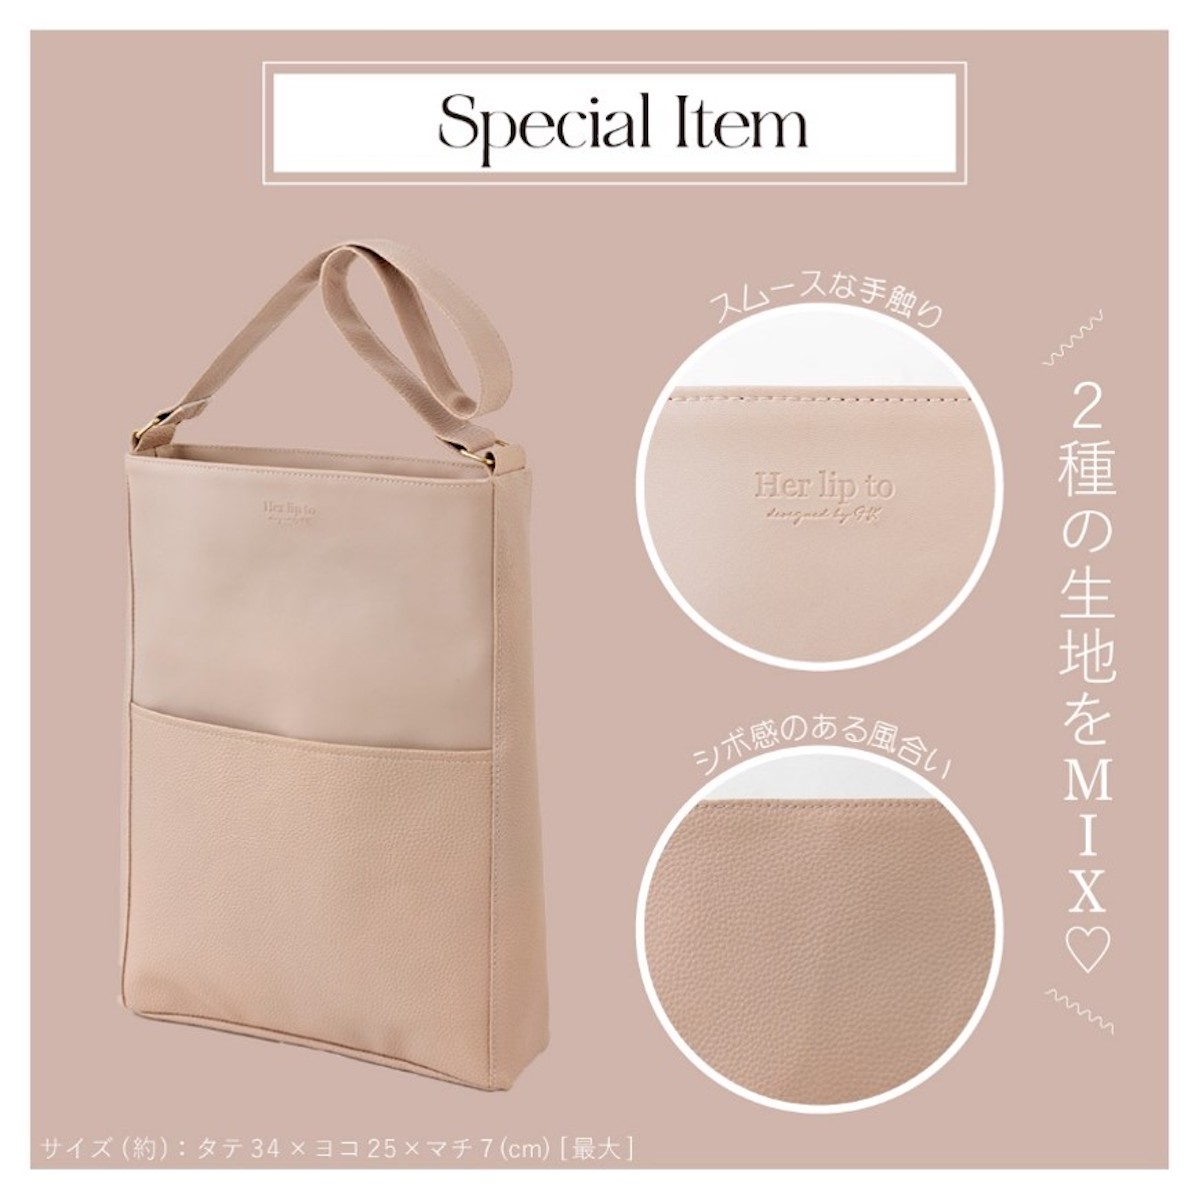 ROSIER x Her lip to BEAUTY Big Tote トート-